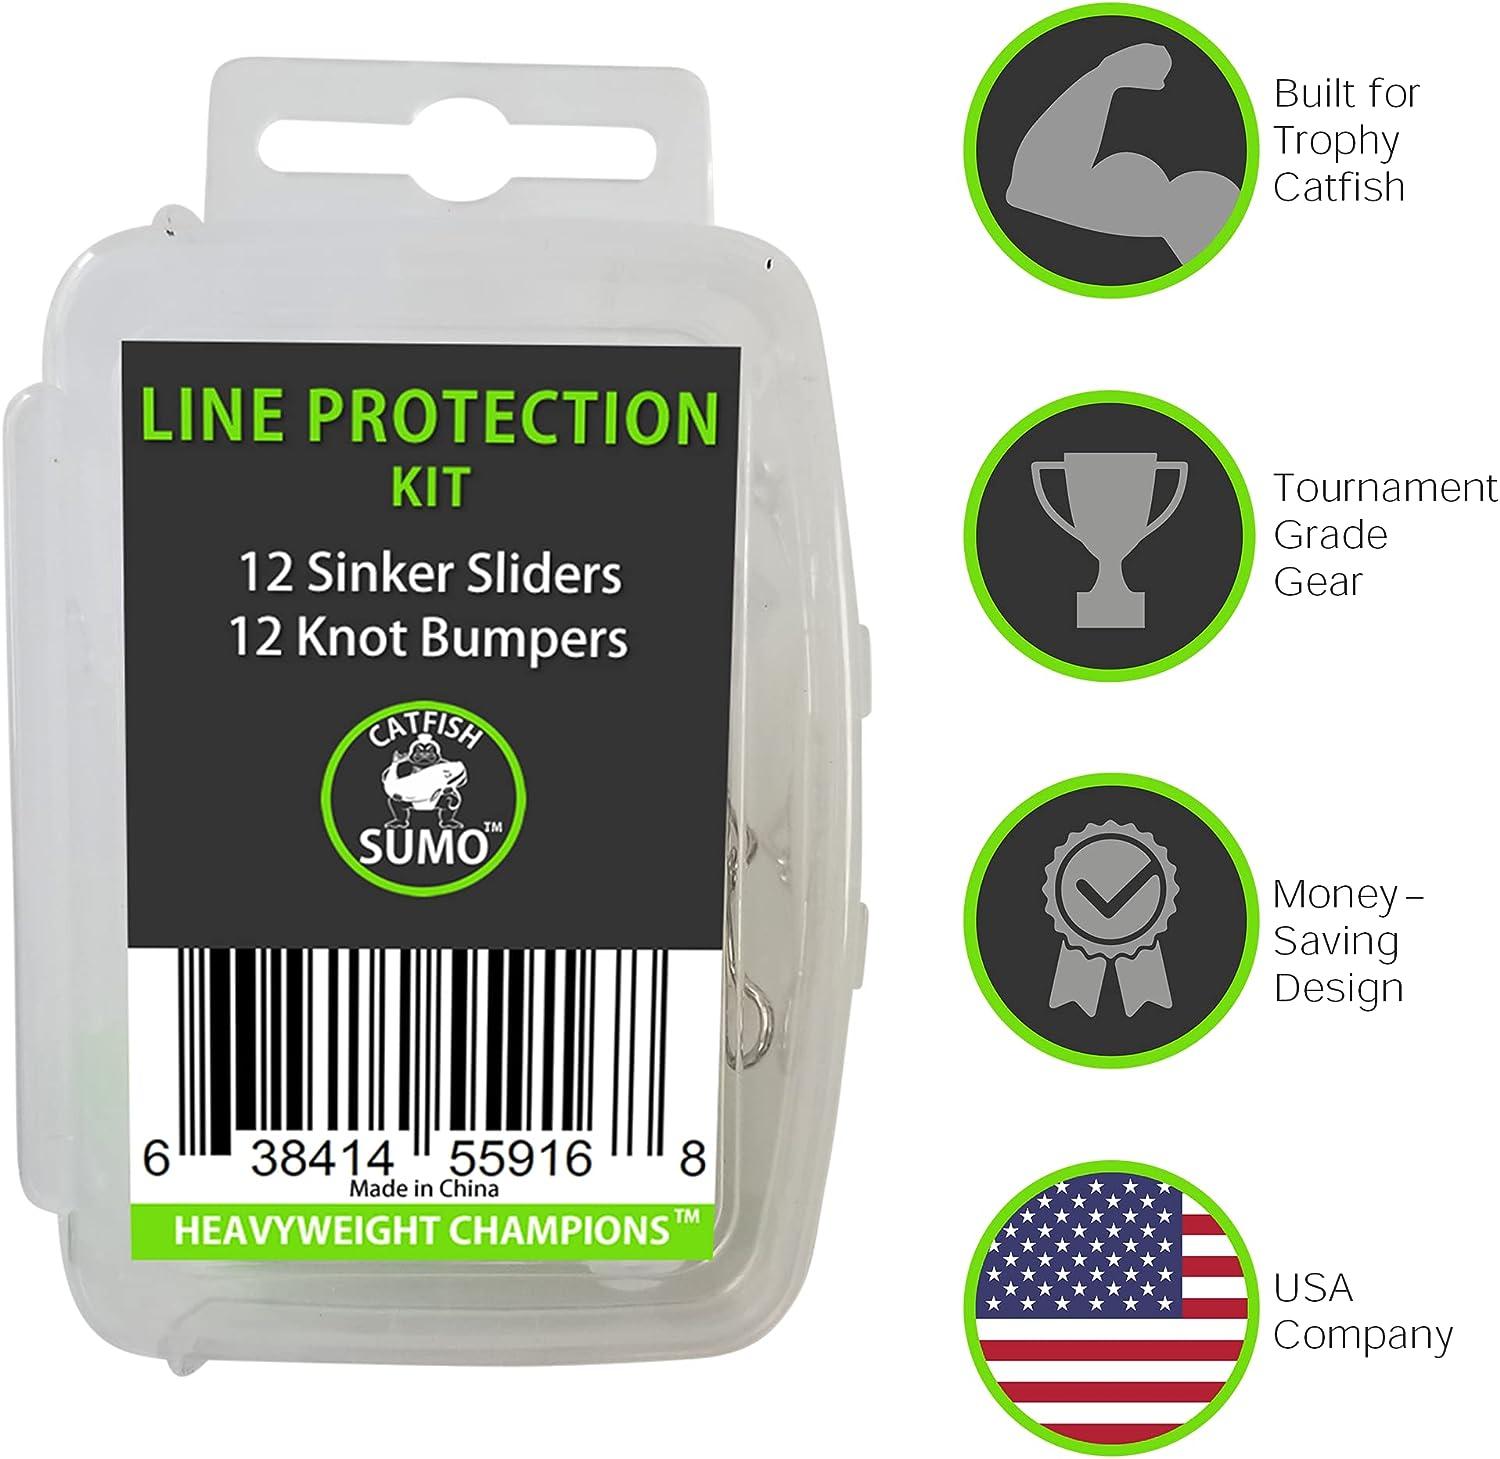 Fishing Line Protection Kit: No-Twist Sinker Slider + Strong Weight Bumpers  - Stop Losing Fish with Heavy-Duty Pieces for Fresh Water and Salt Water